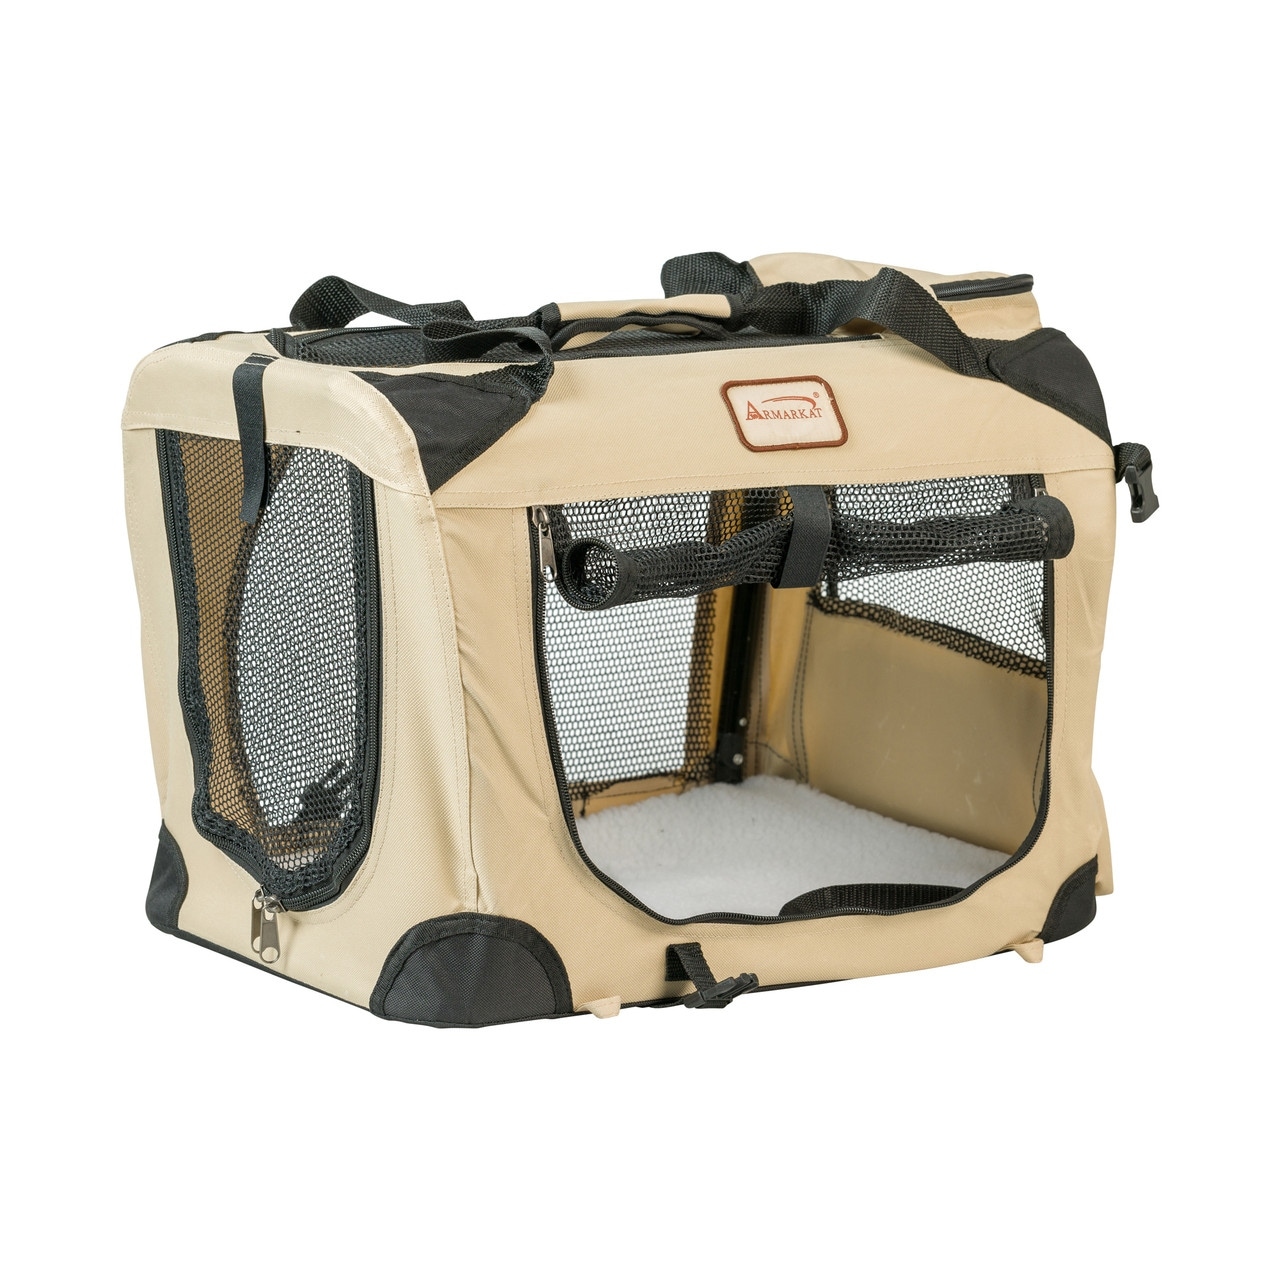 https://ak1.ostkcdn.com/images/products/is/images/direct/d2ff8f1d948bbdd313b59188b4f042a6454f4bf8/FoldIng-Soft-Dog-Crate-for-Dogs-and-Cats%2C-Pet-Travel-Carrier.jpg